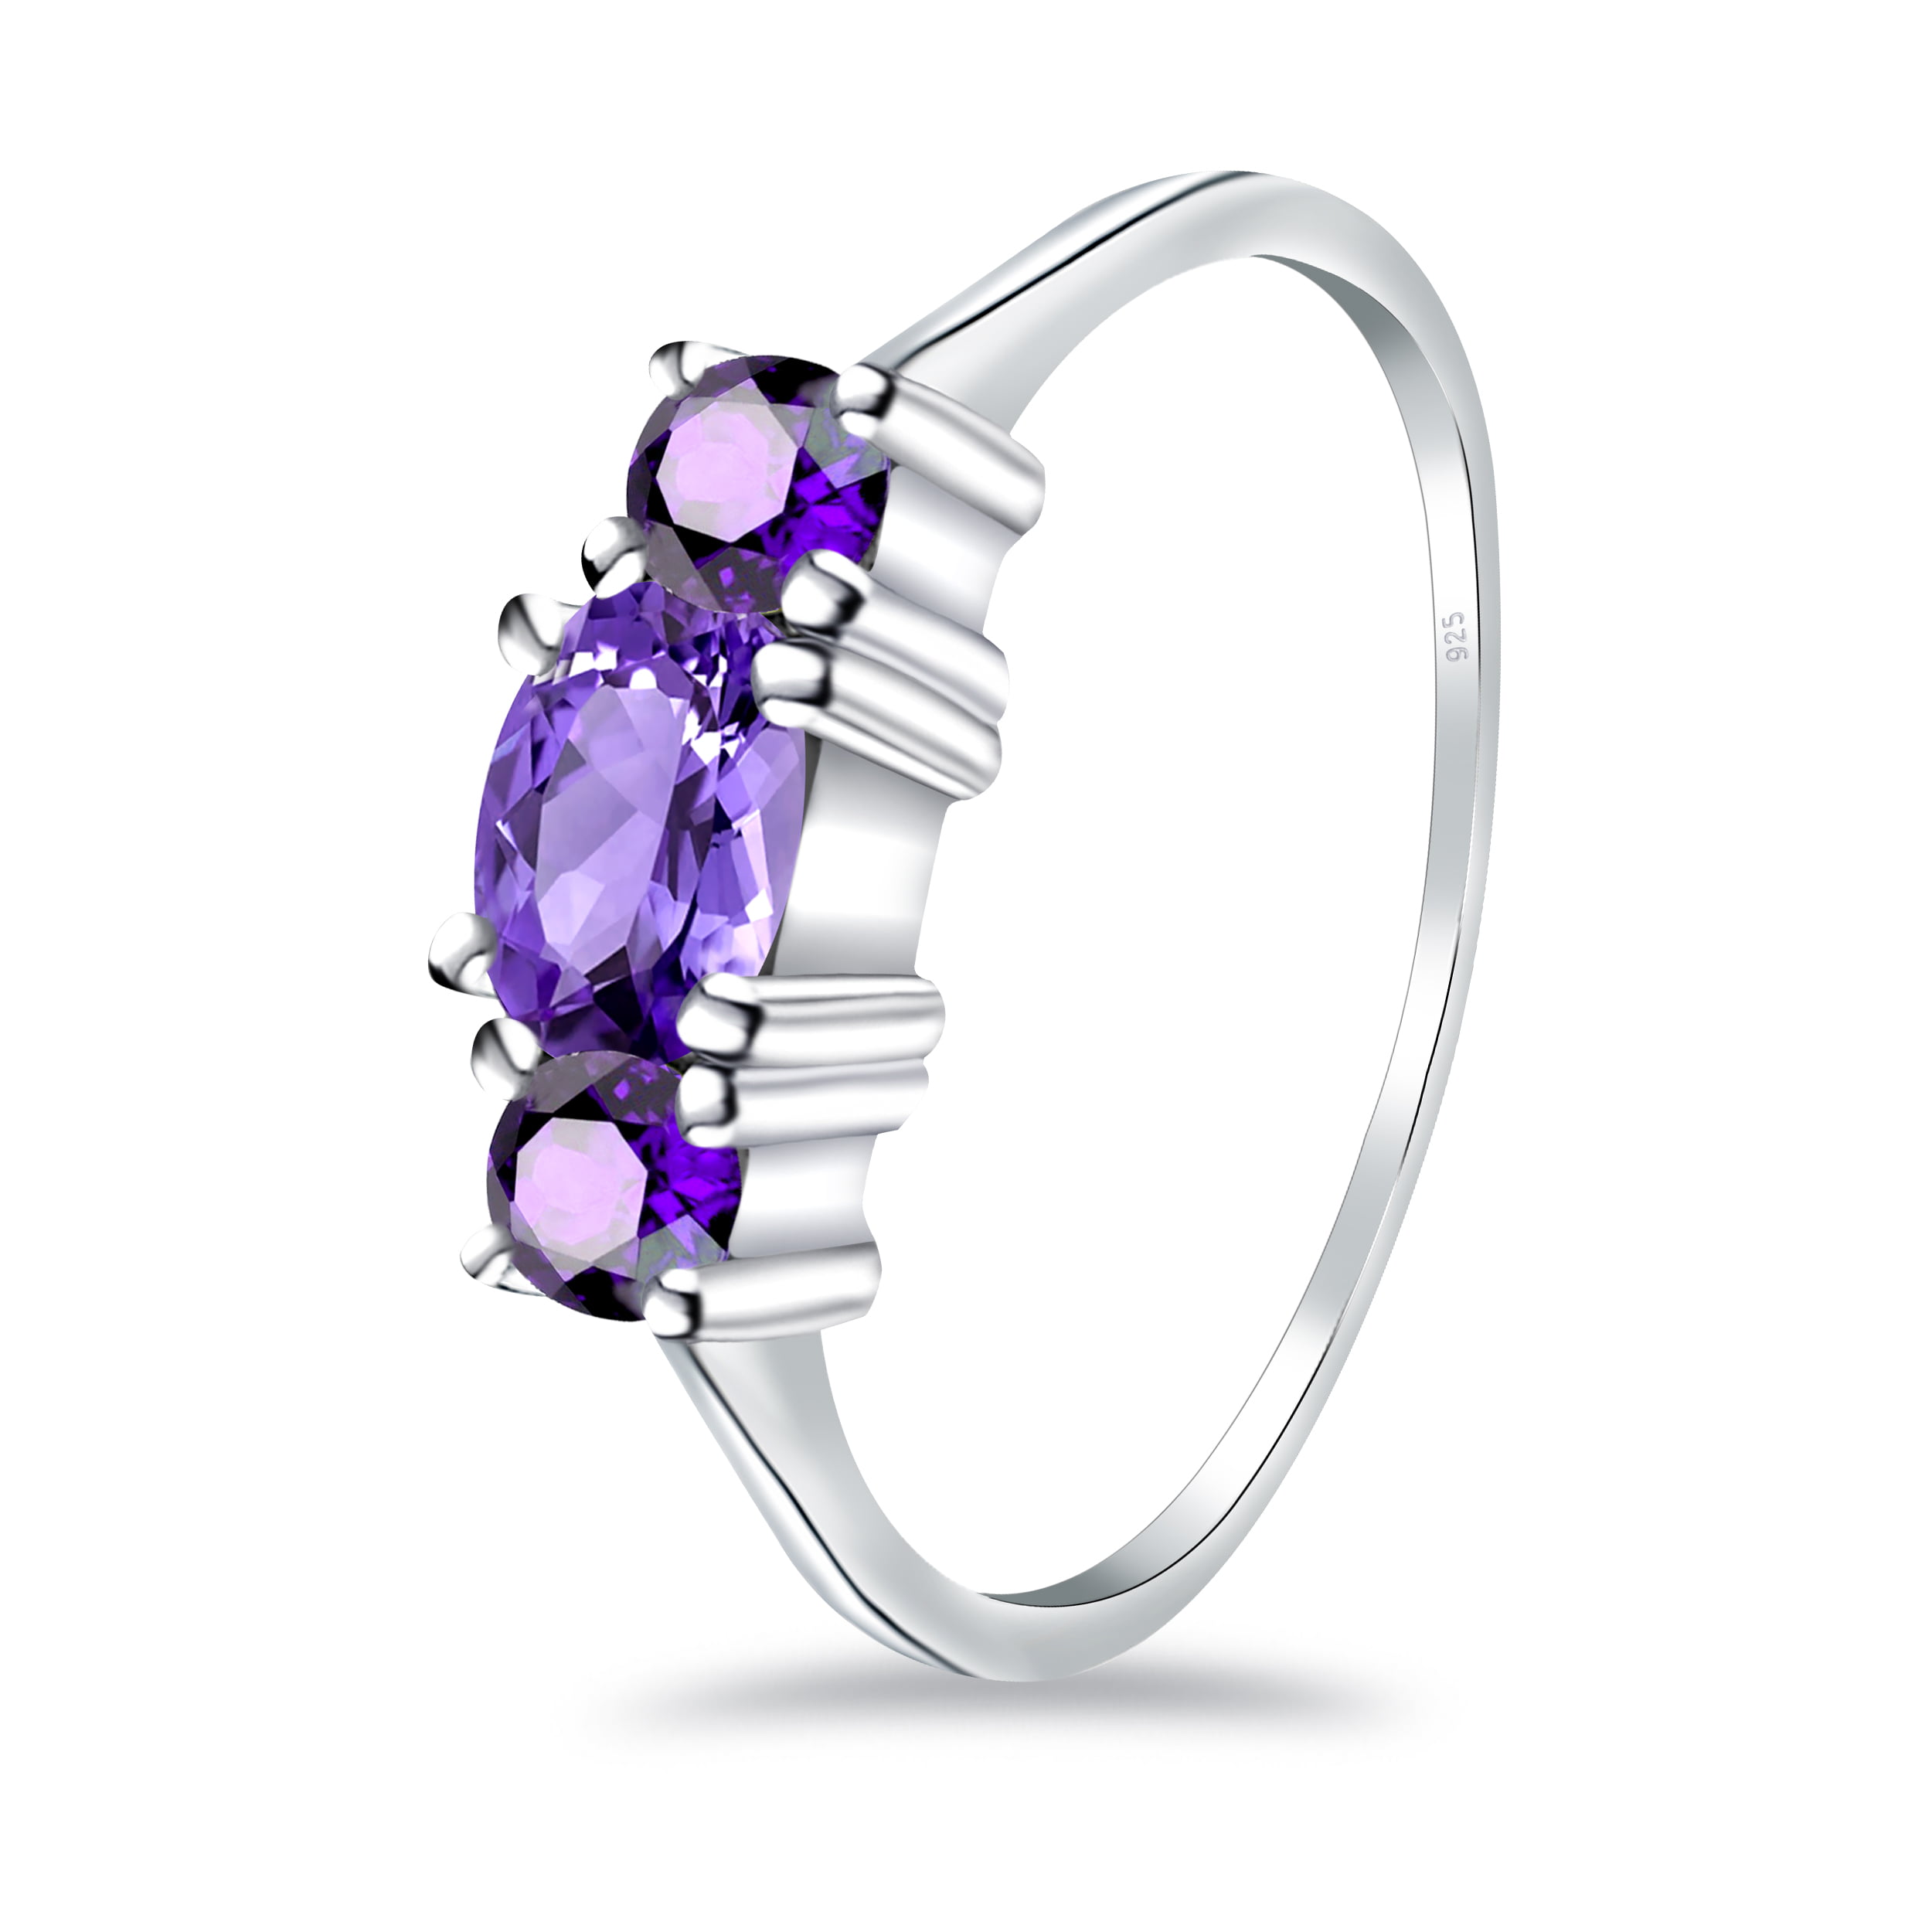 Details about   Amethyst Gemstone Engagement Ring 925 Sterling Silver Womens Jewelry 